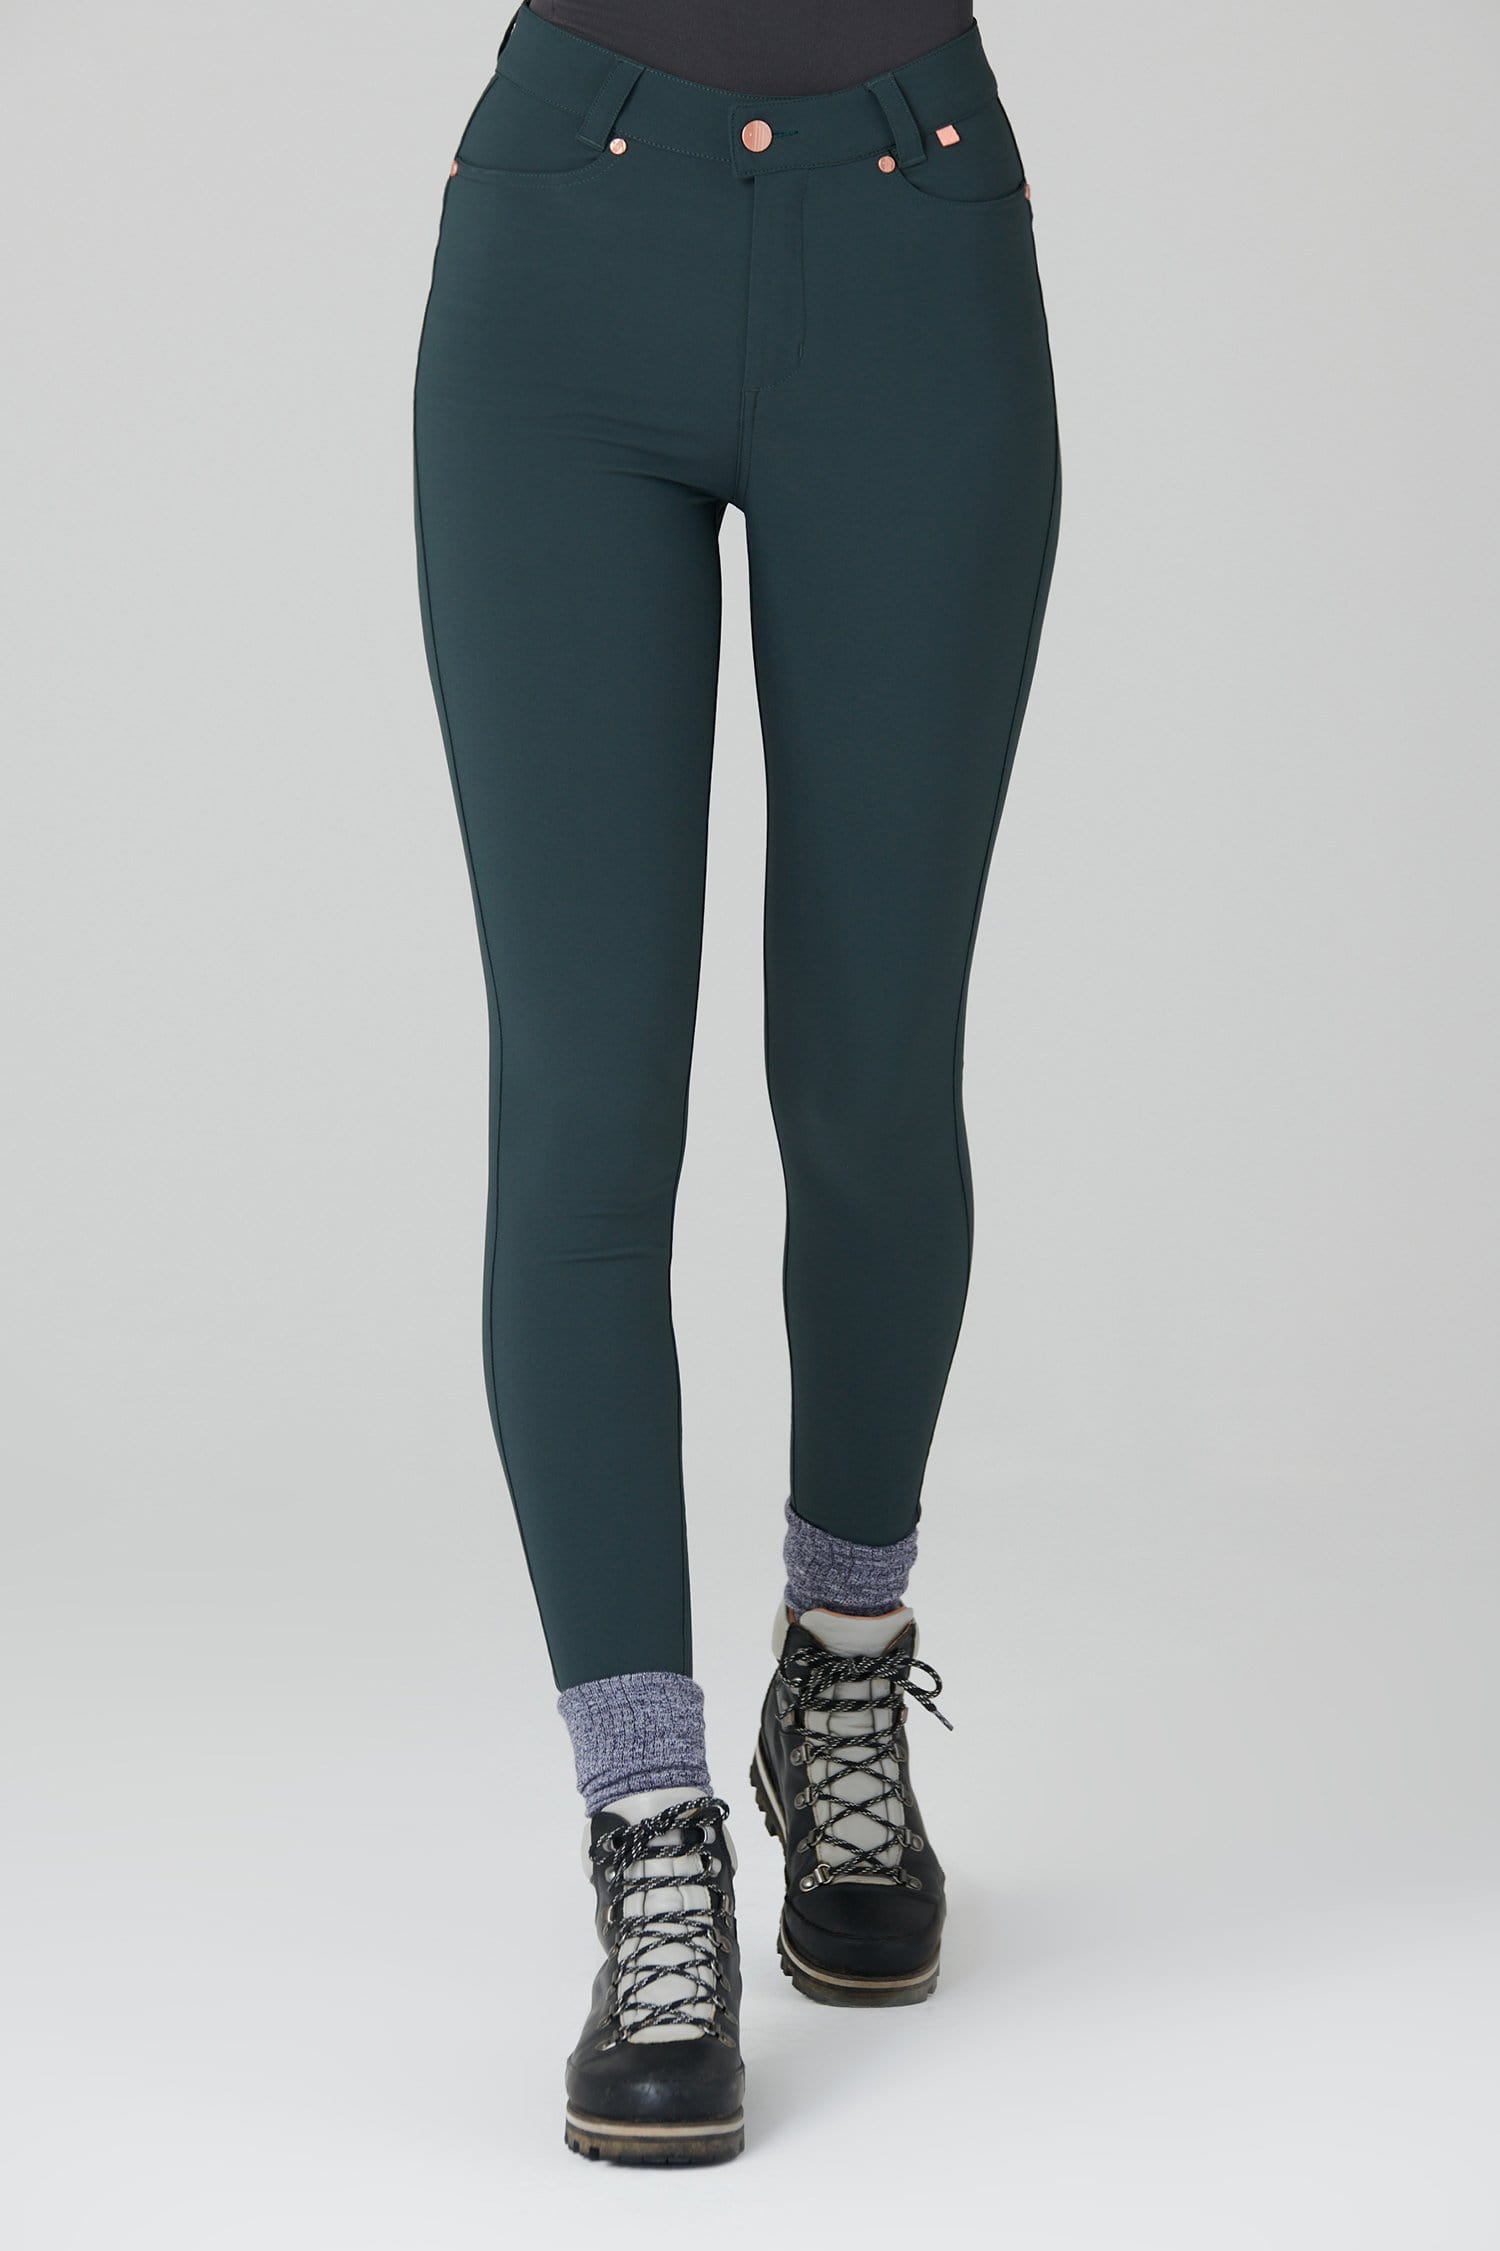 Thermal Skinny Outdoor Trousers - Forest Green - 32r / Uk14 - Womens - Acai Outdoorwear